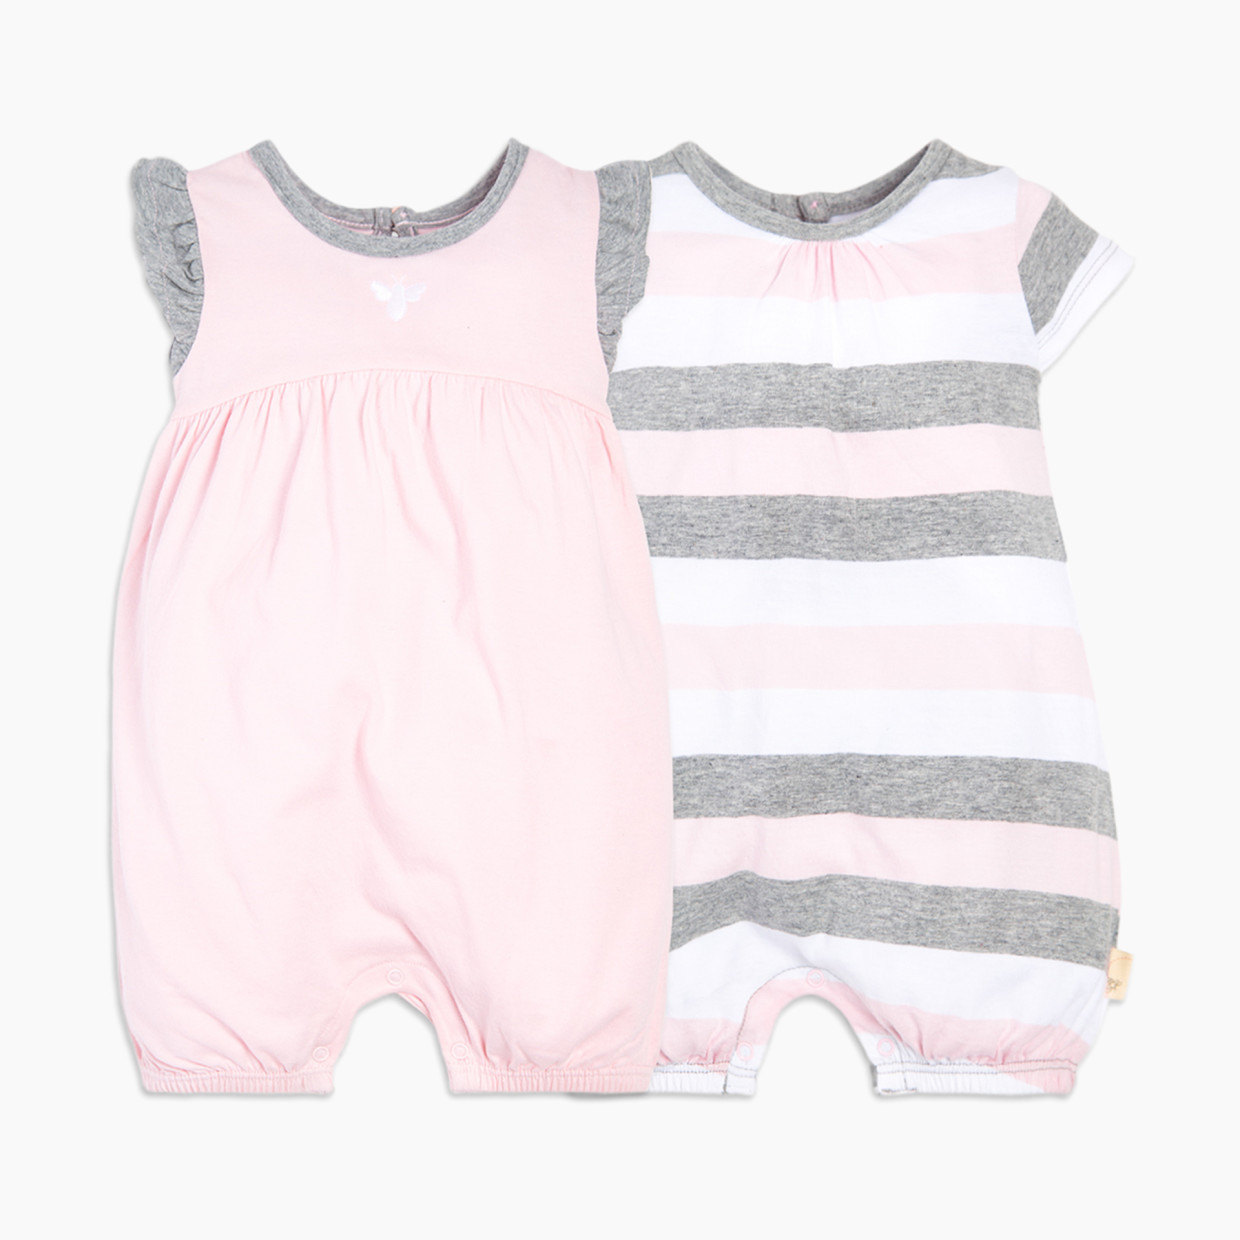 Burt's Bees Baby 2 Pack Rompers - Blossom Multi Stripe, 12 Months.